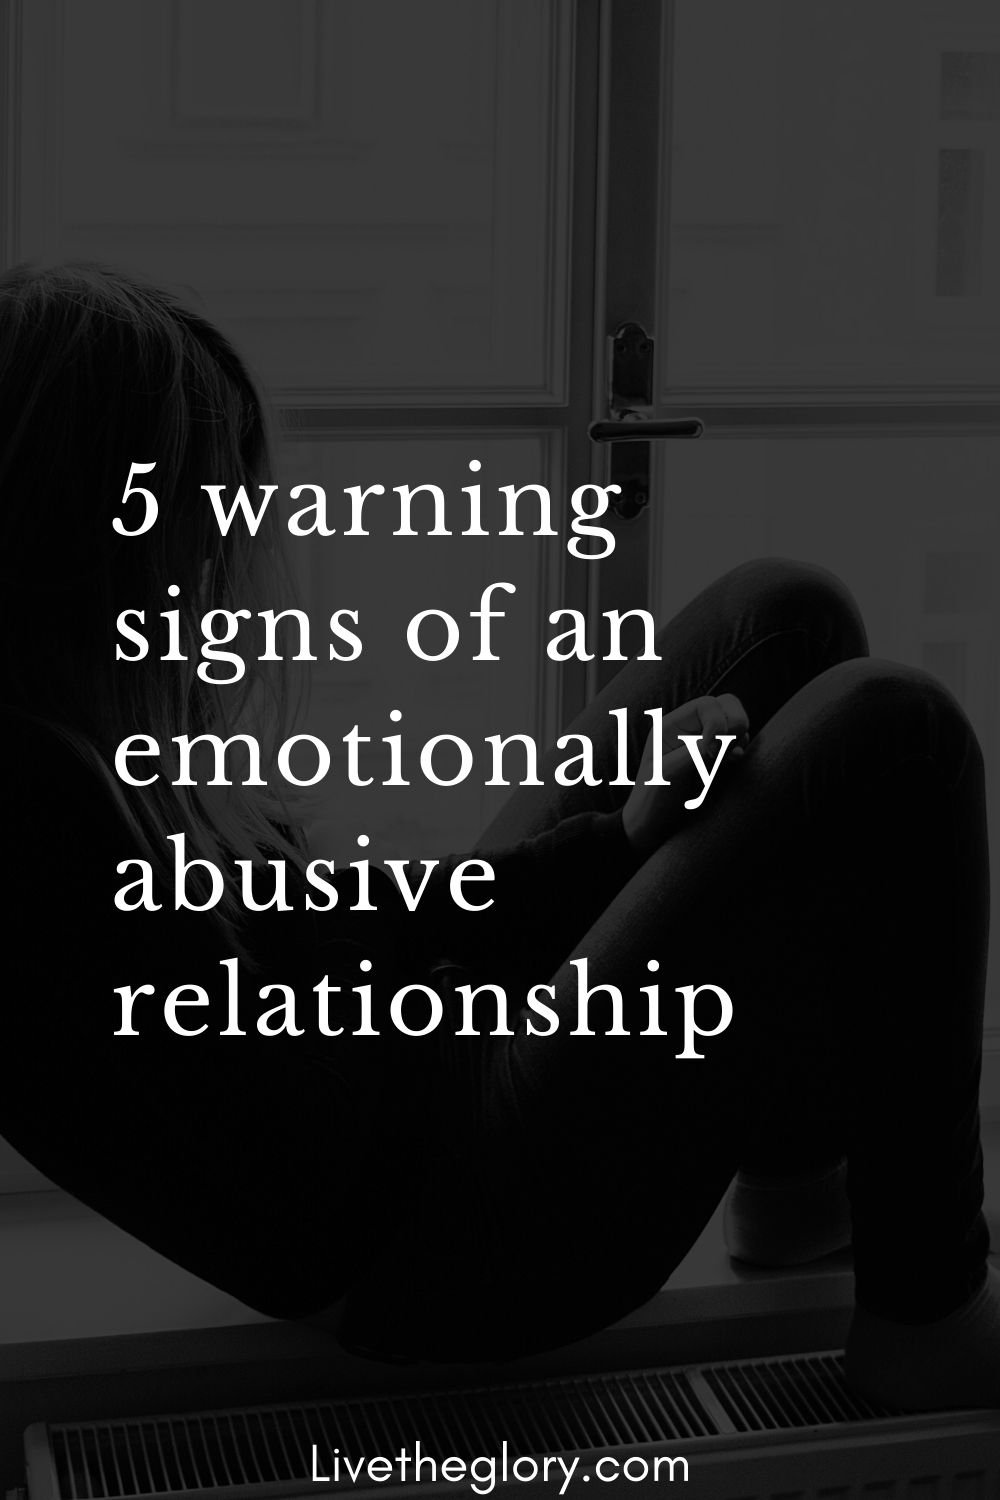 what are 5 warning signs of an abusive relationship